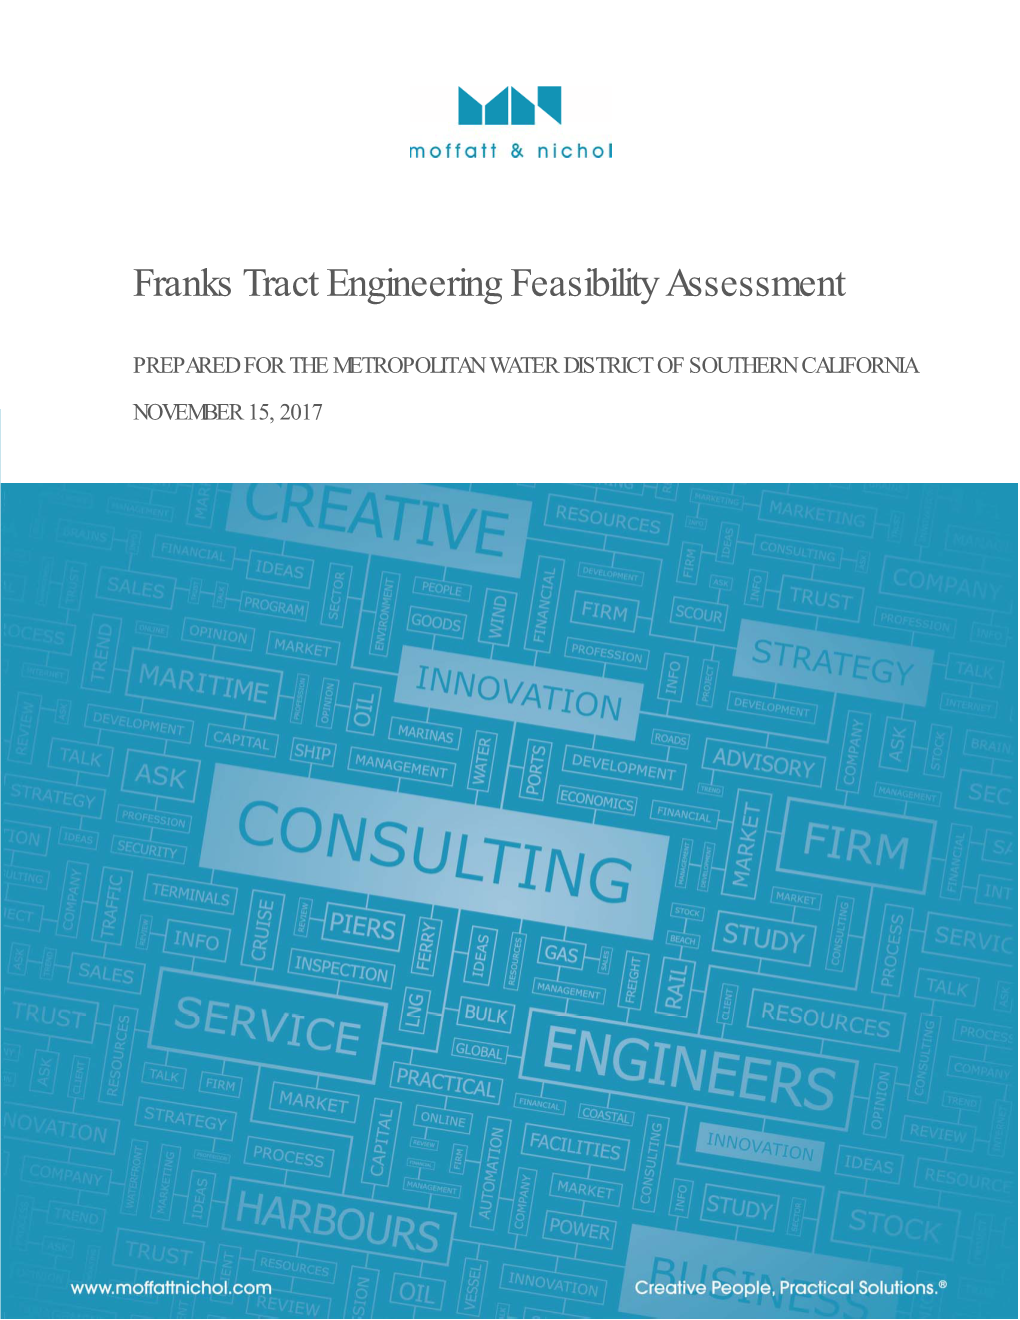 Franks Tract Engineering Feasibility Assessment